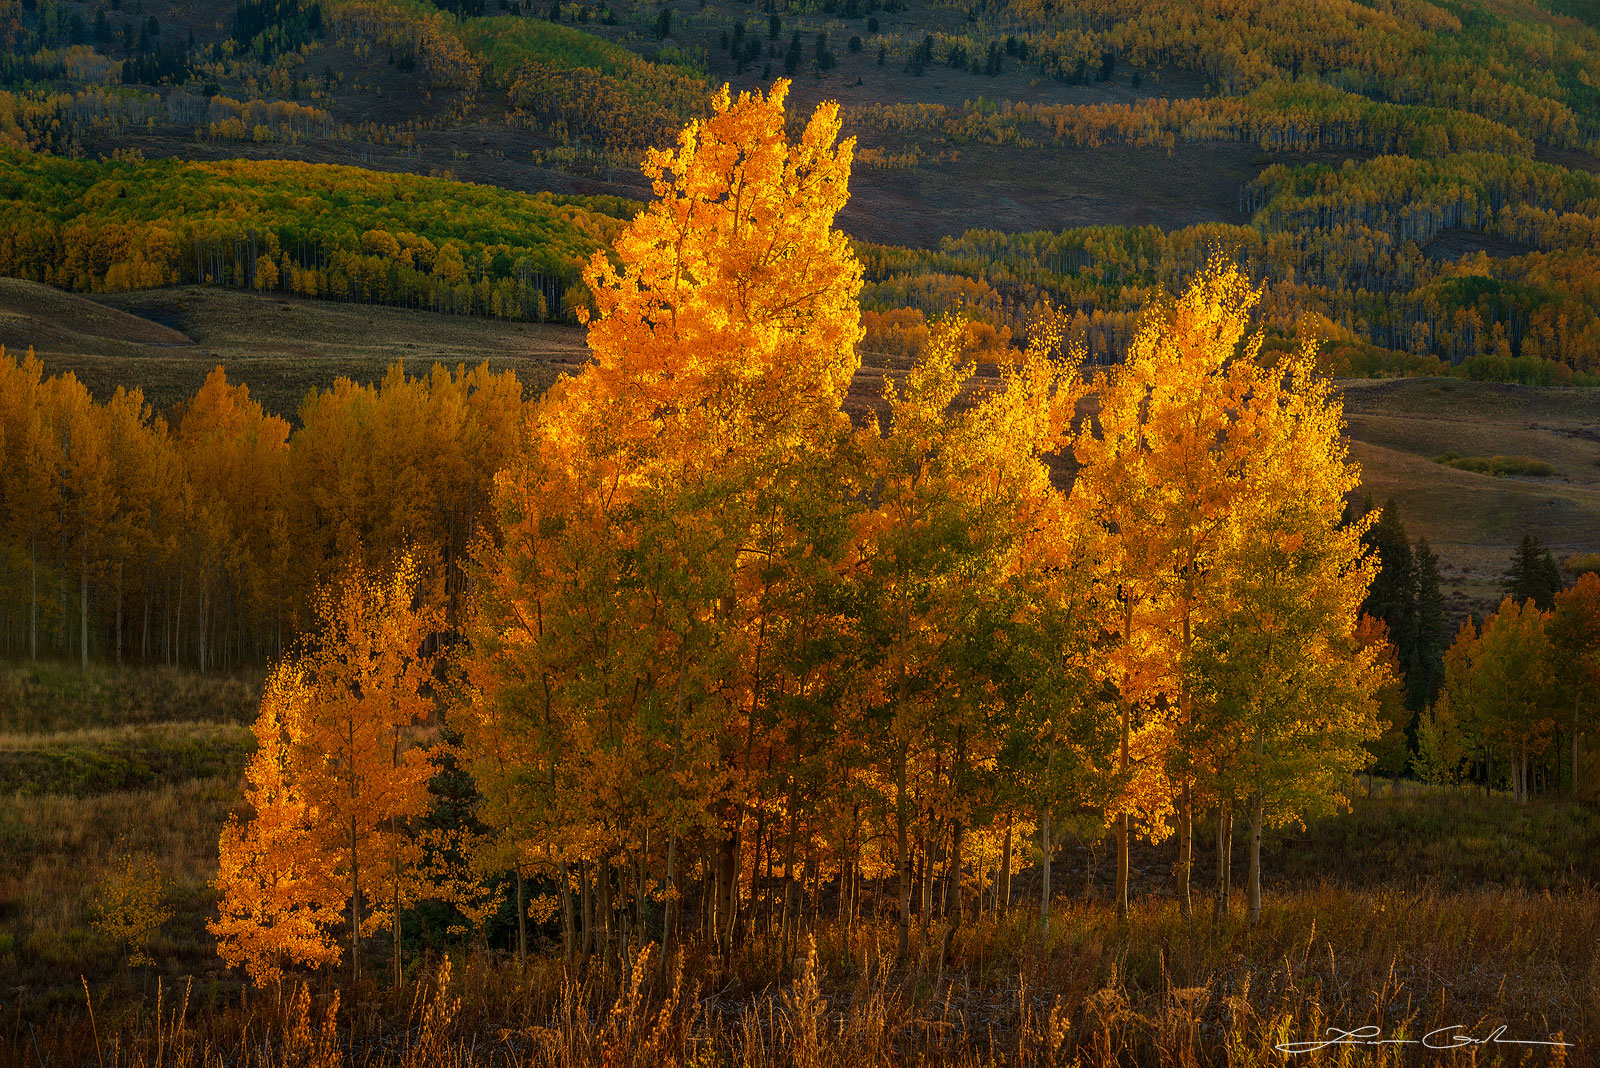 Sunlit aspen trees in autumnal glory captured in 'Light Catchers' - a stunning fine art image showcasing the radiant beauty of fall foliage illuminated by the morning sunrise. - Gintchin Fine Art